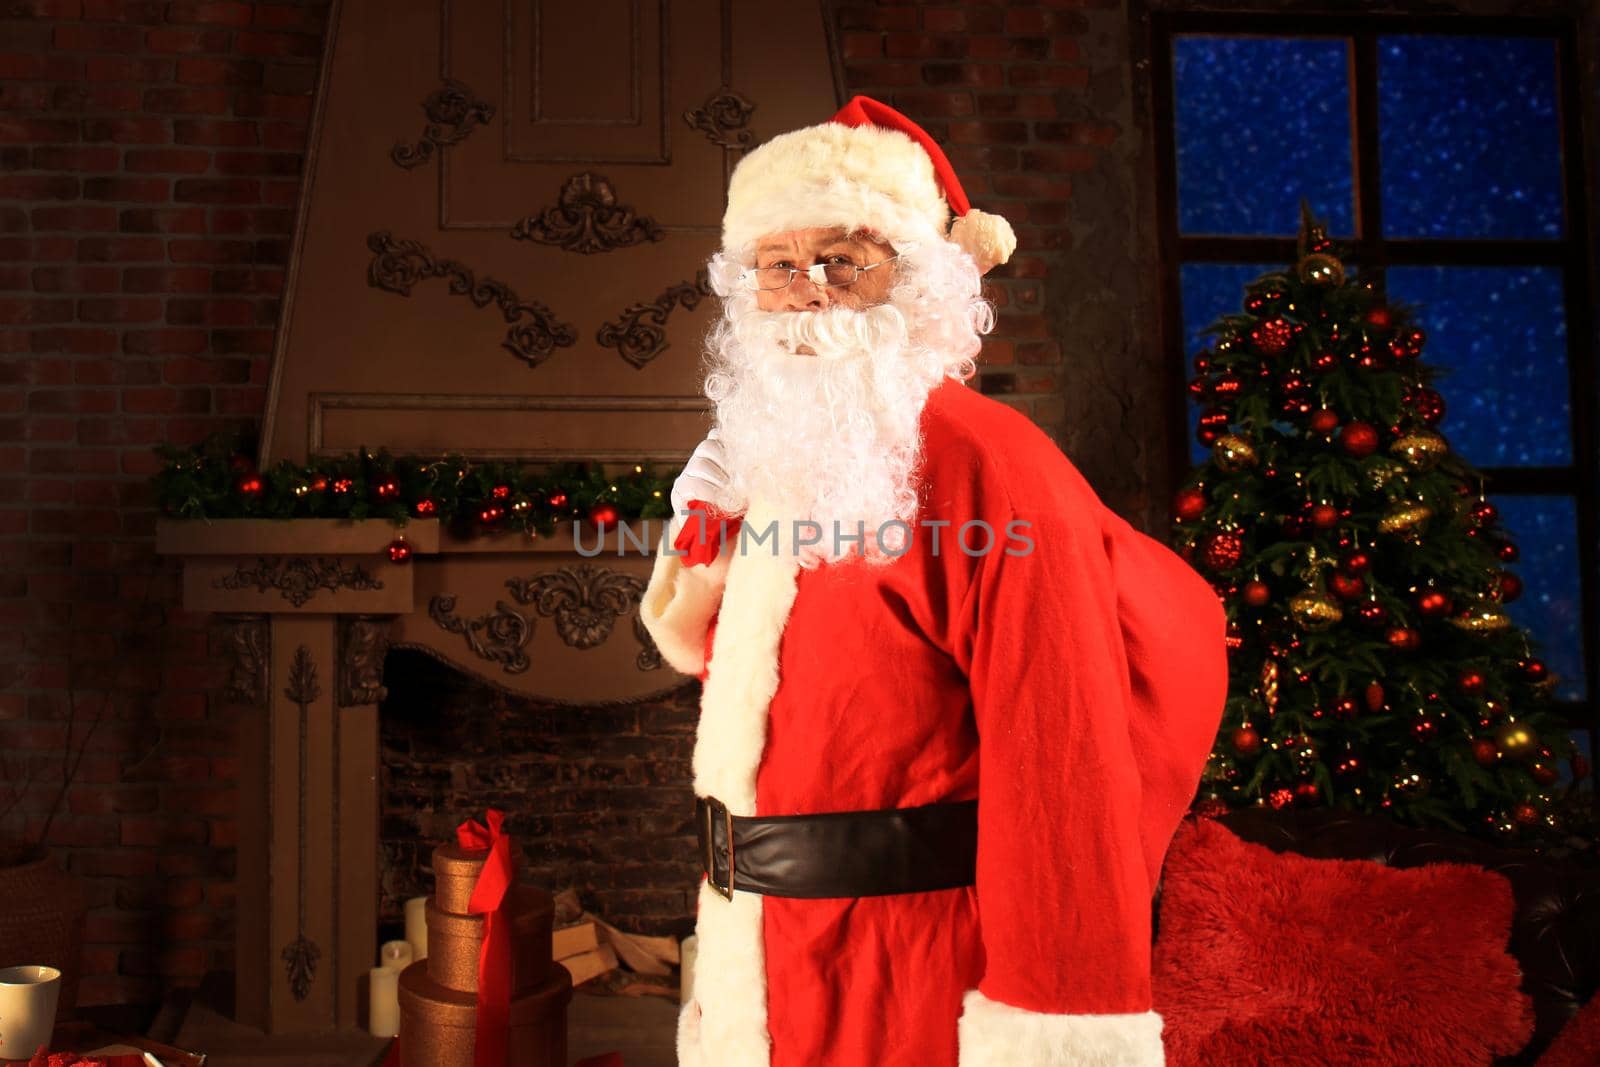 Santa Claus holding carrying sack with gifts for kids.